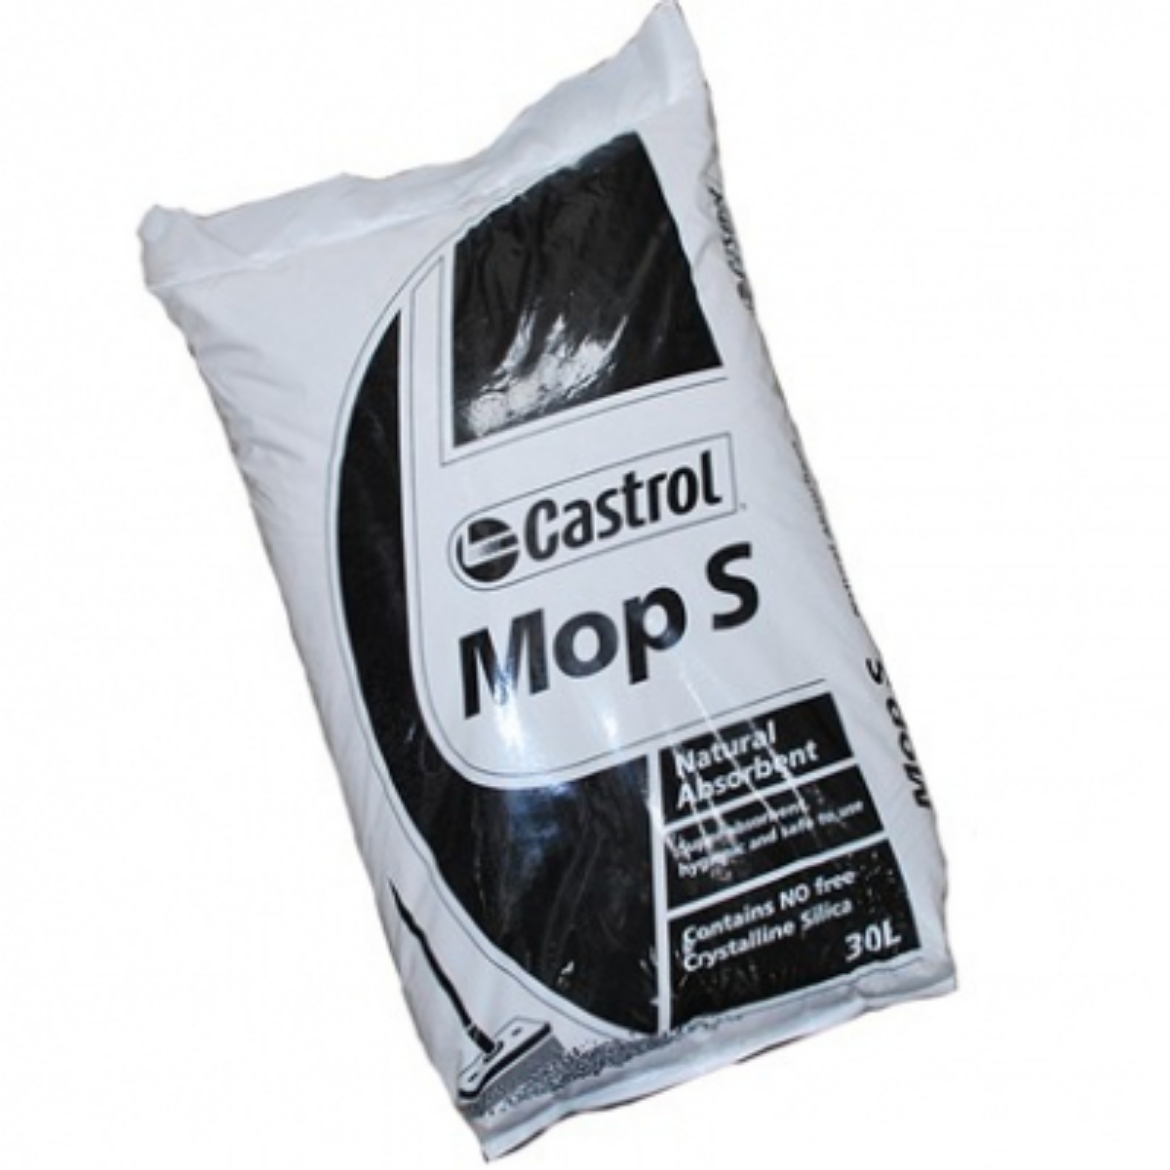 Picture of MOP S 30L NATURAL ABSORBENT